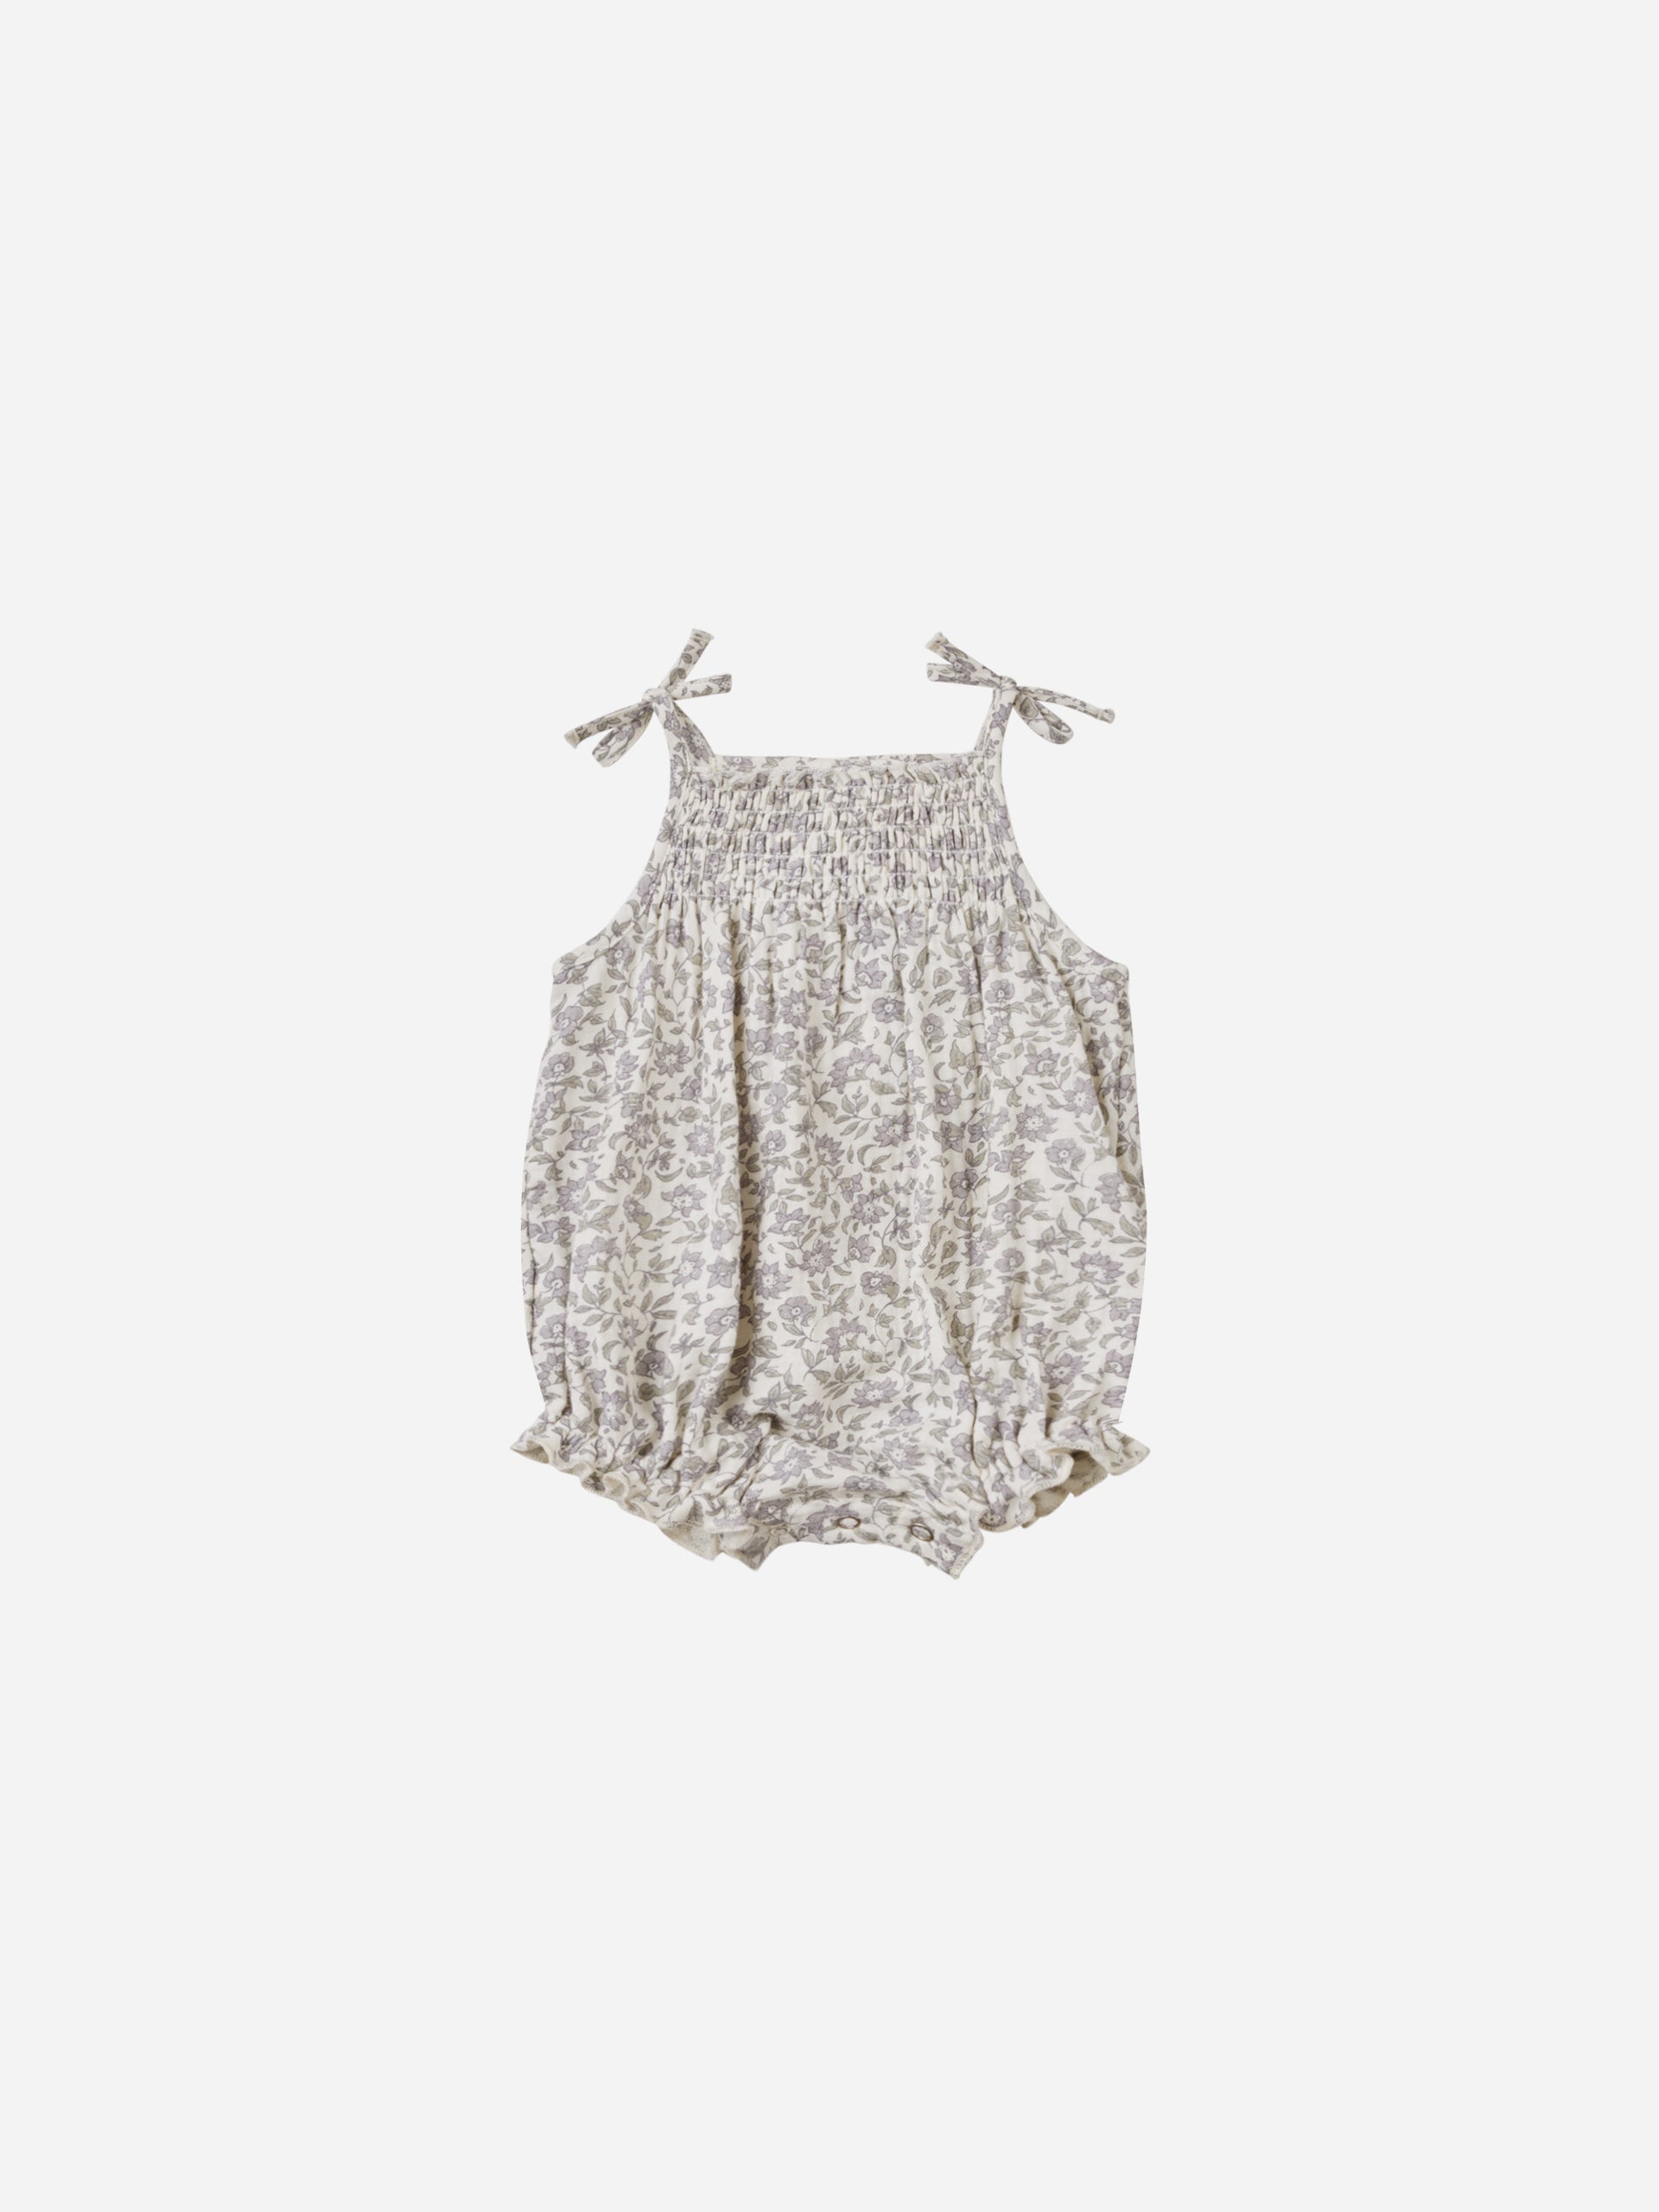 Betty Romper || French Garden - Rylee + Cru | Kids Clothes | Trendy Baby Clothes | Modern Infant Outfits |